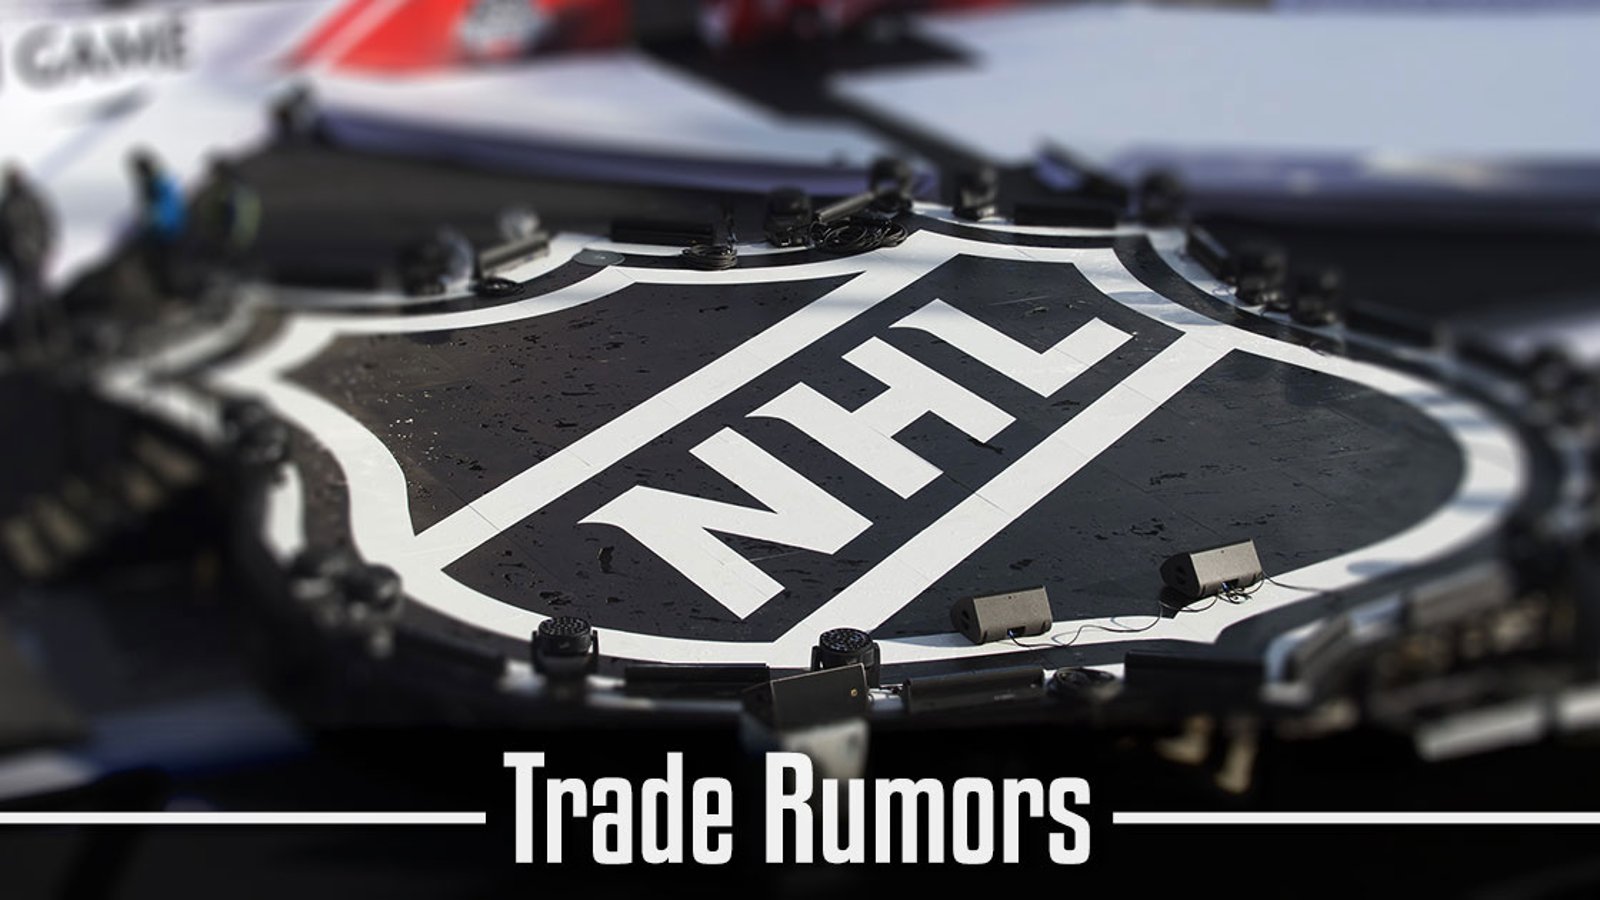 The Penguins should add one particular player at trade deadline.